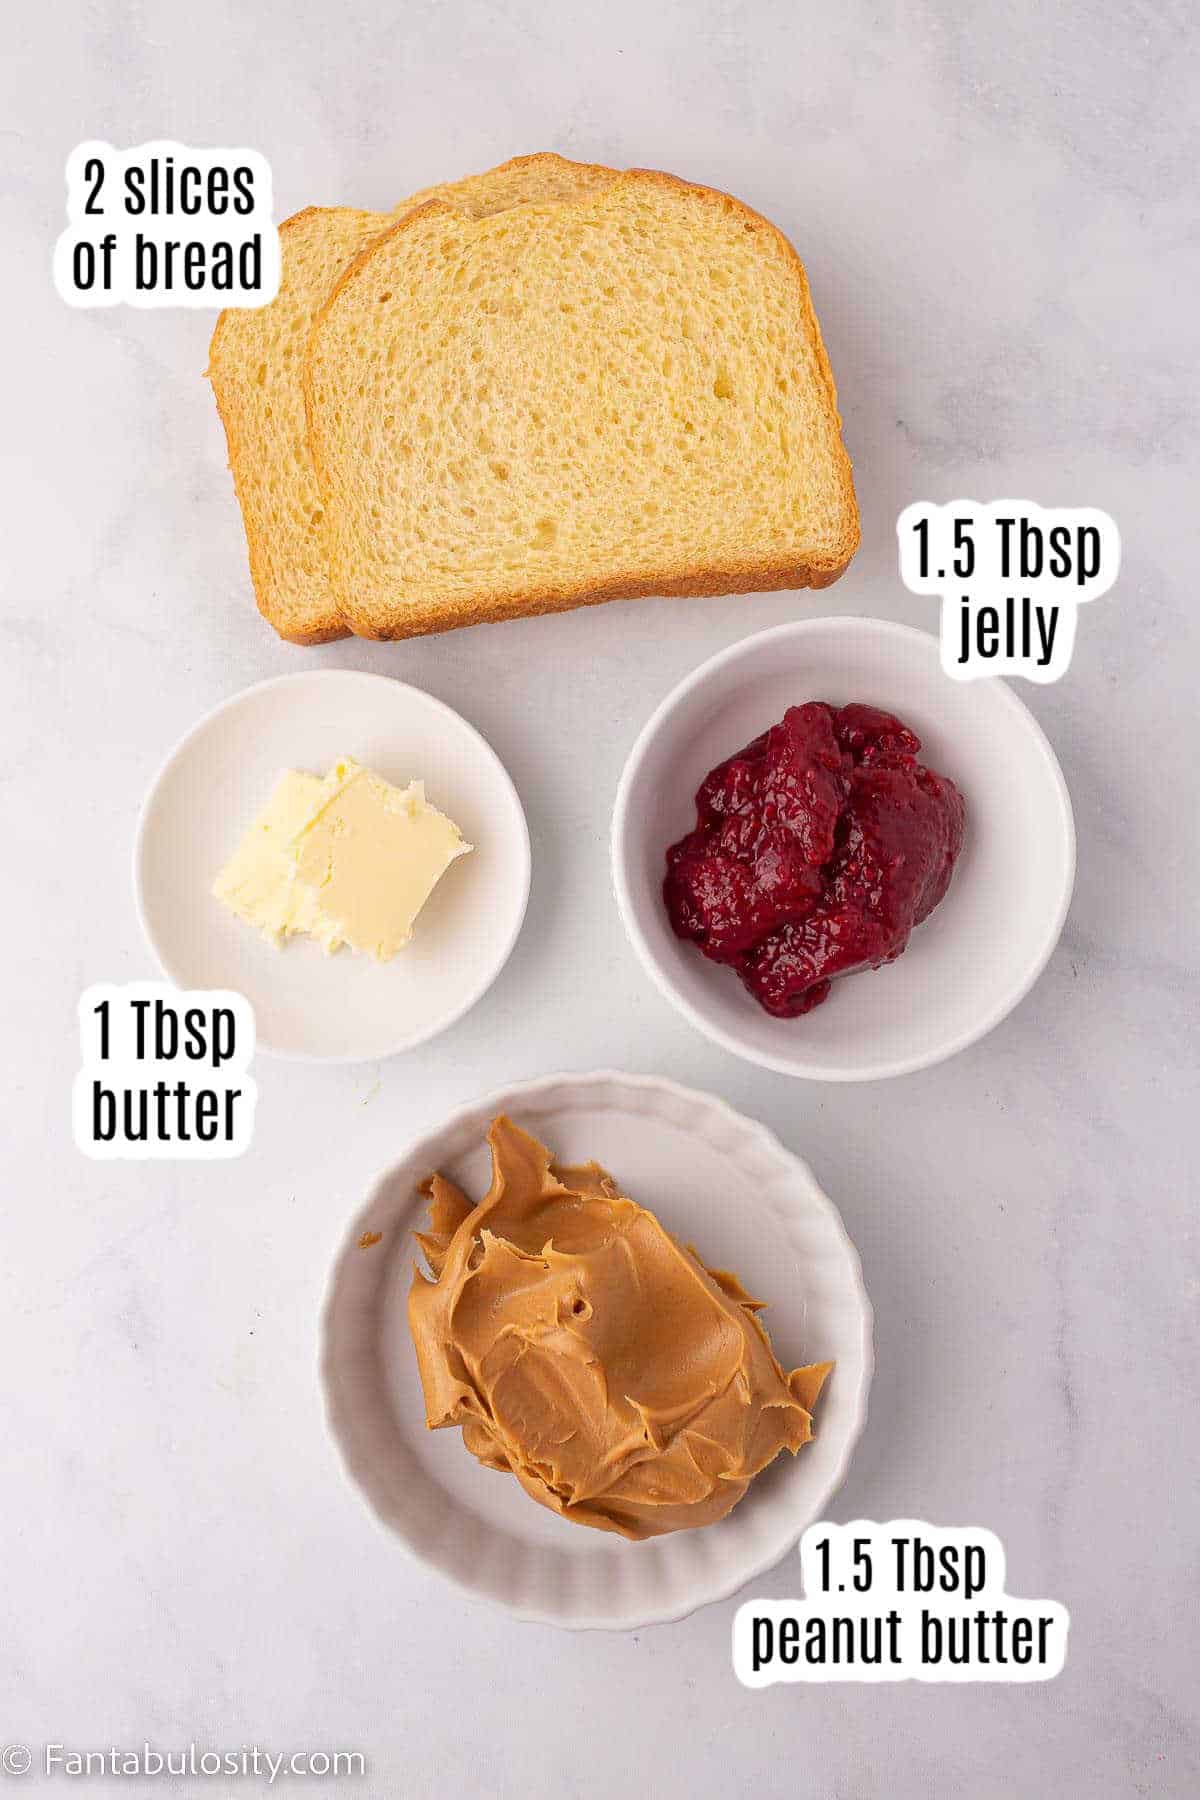 Ingredients for fried peanut butter and jelly sandwich.